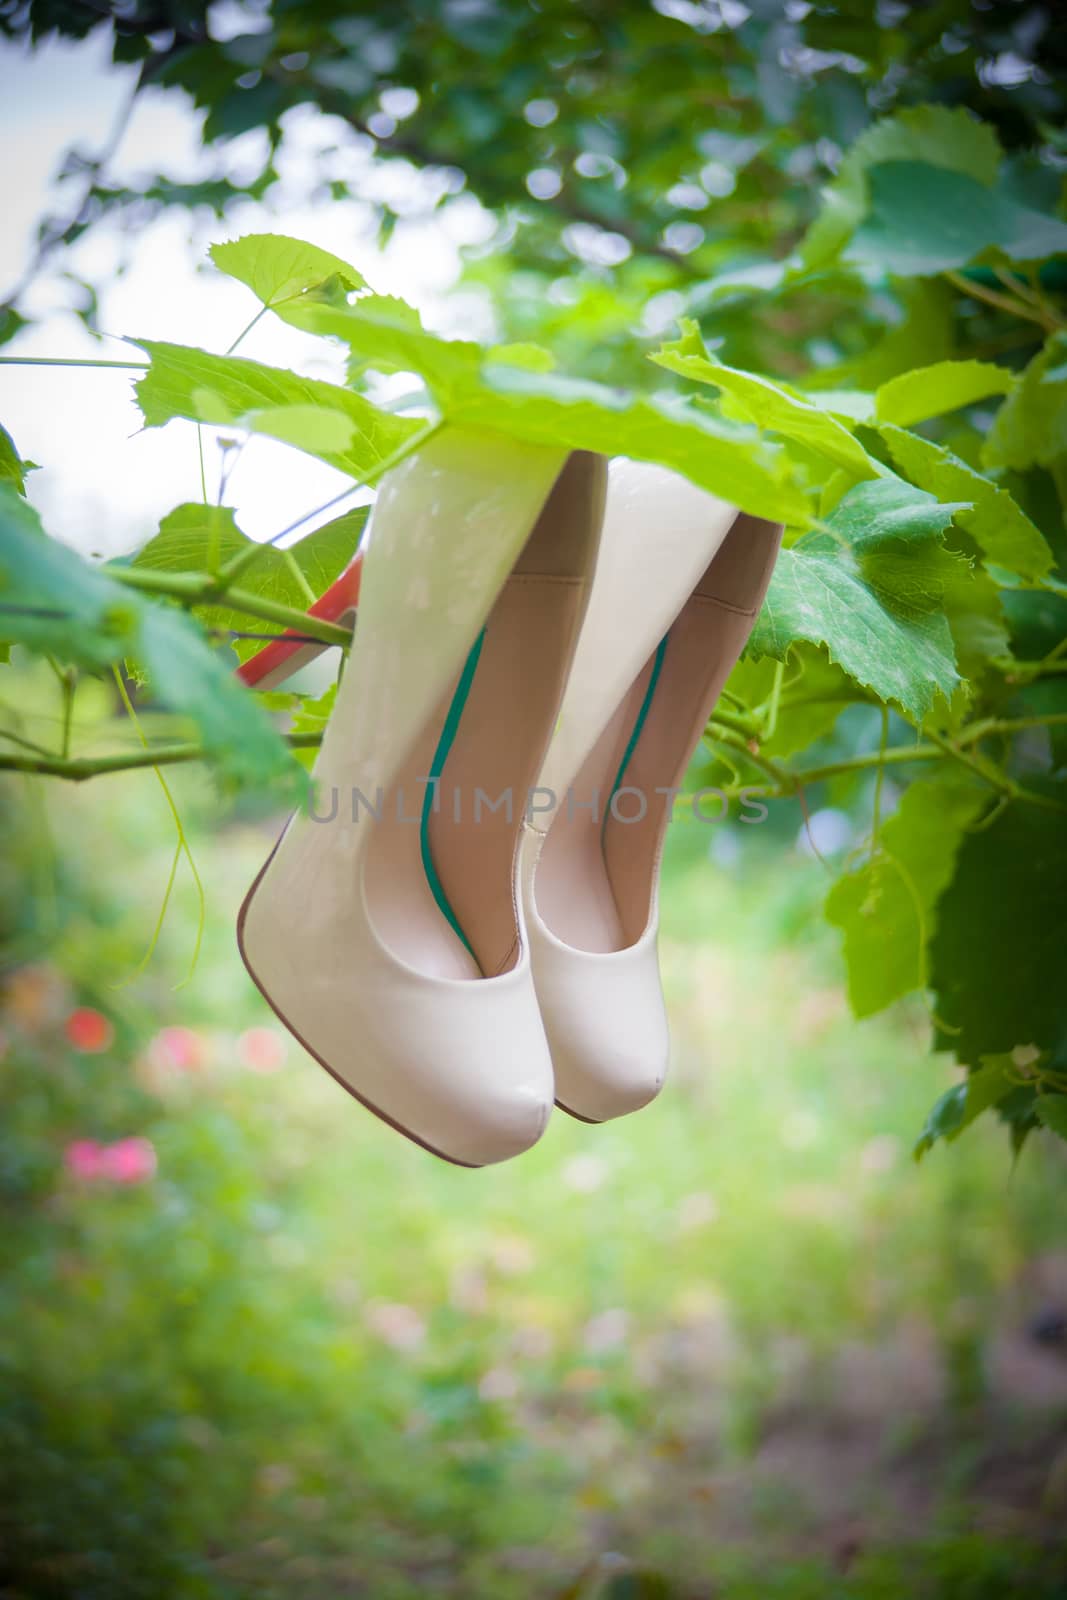 Womens shoes with high heels are hanging by sfinks